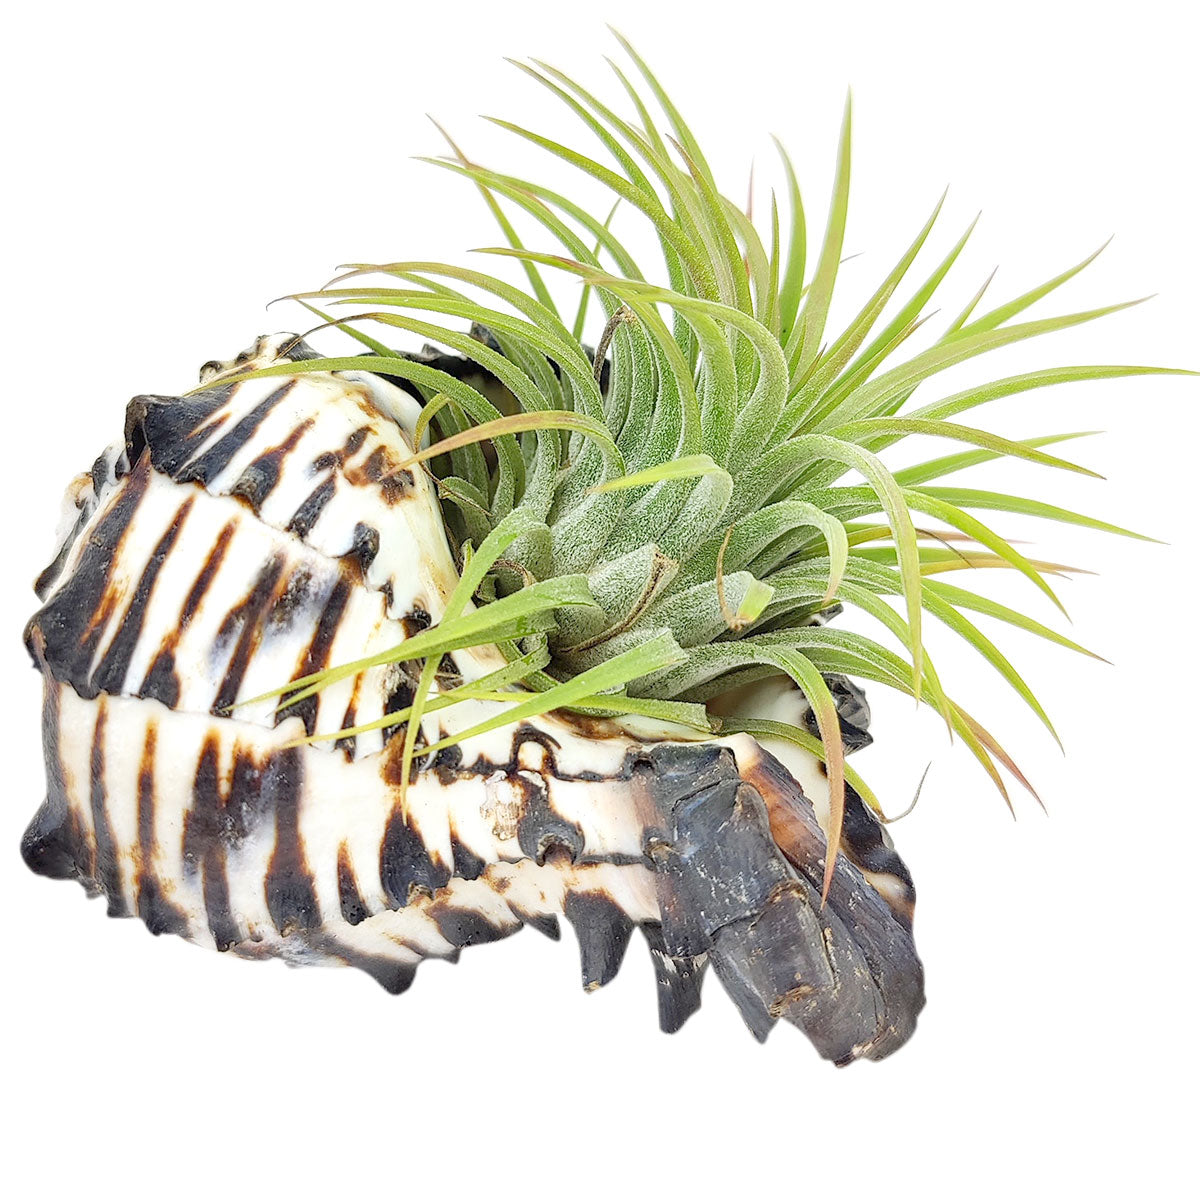 Air plant pots for sale, air plant accessories for sale, air plant gift decor ideas,  Air plant holder, seashell air plant holder